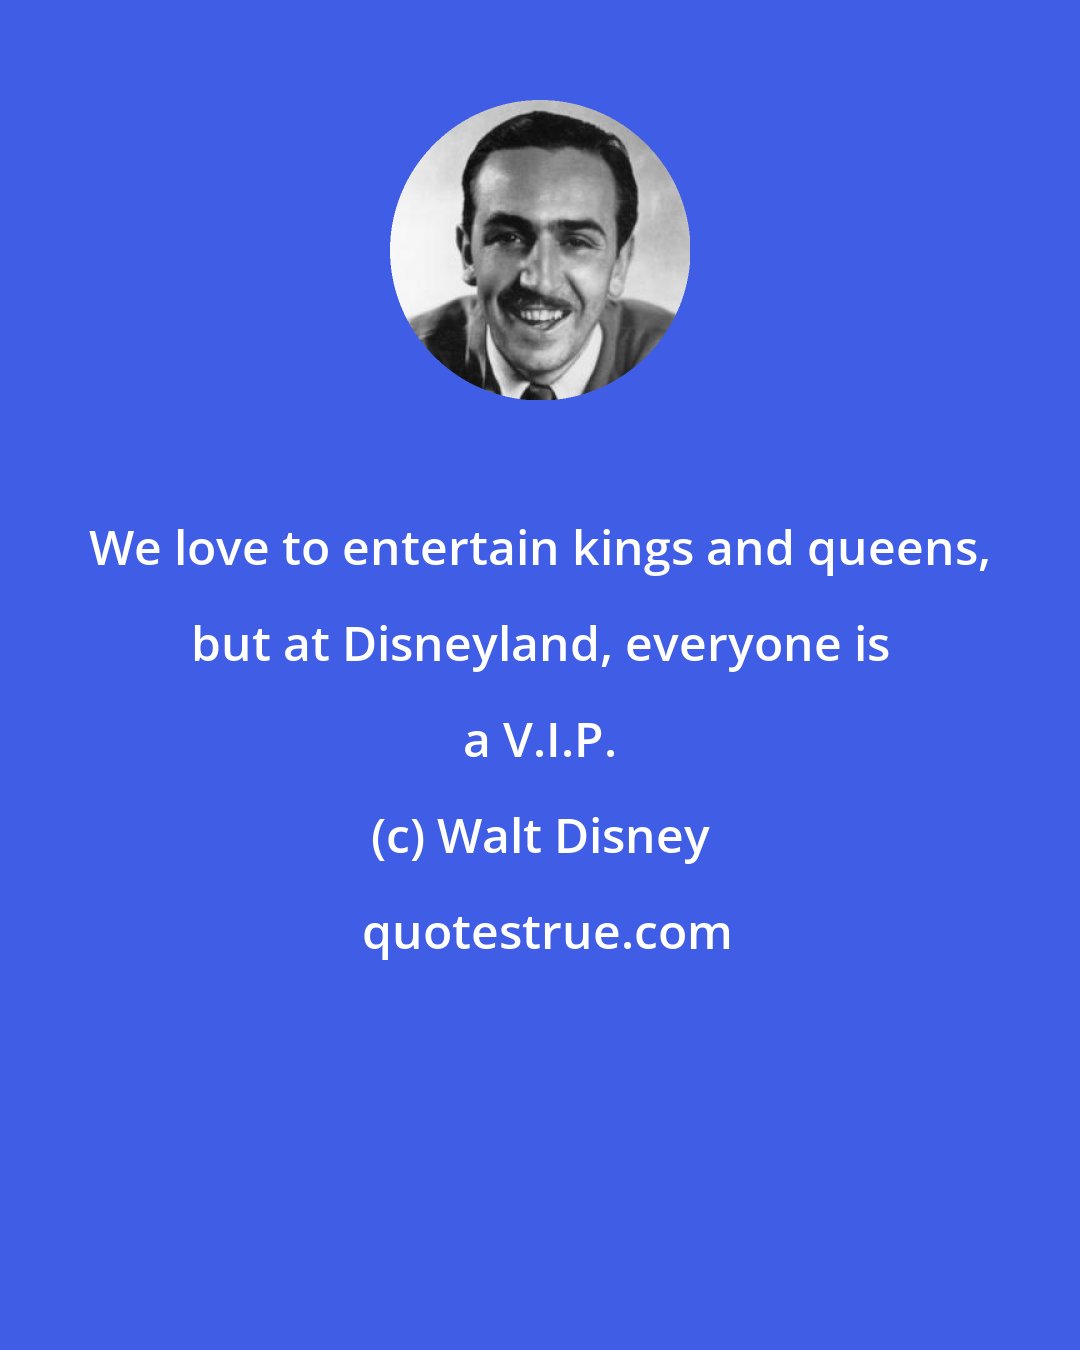 Walt Disney: We love to entertain kings and queens, but at Disneyland, everyone is a V.I.P.